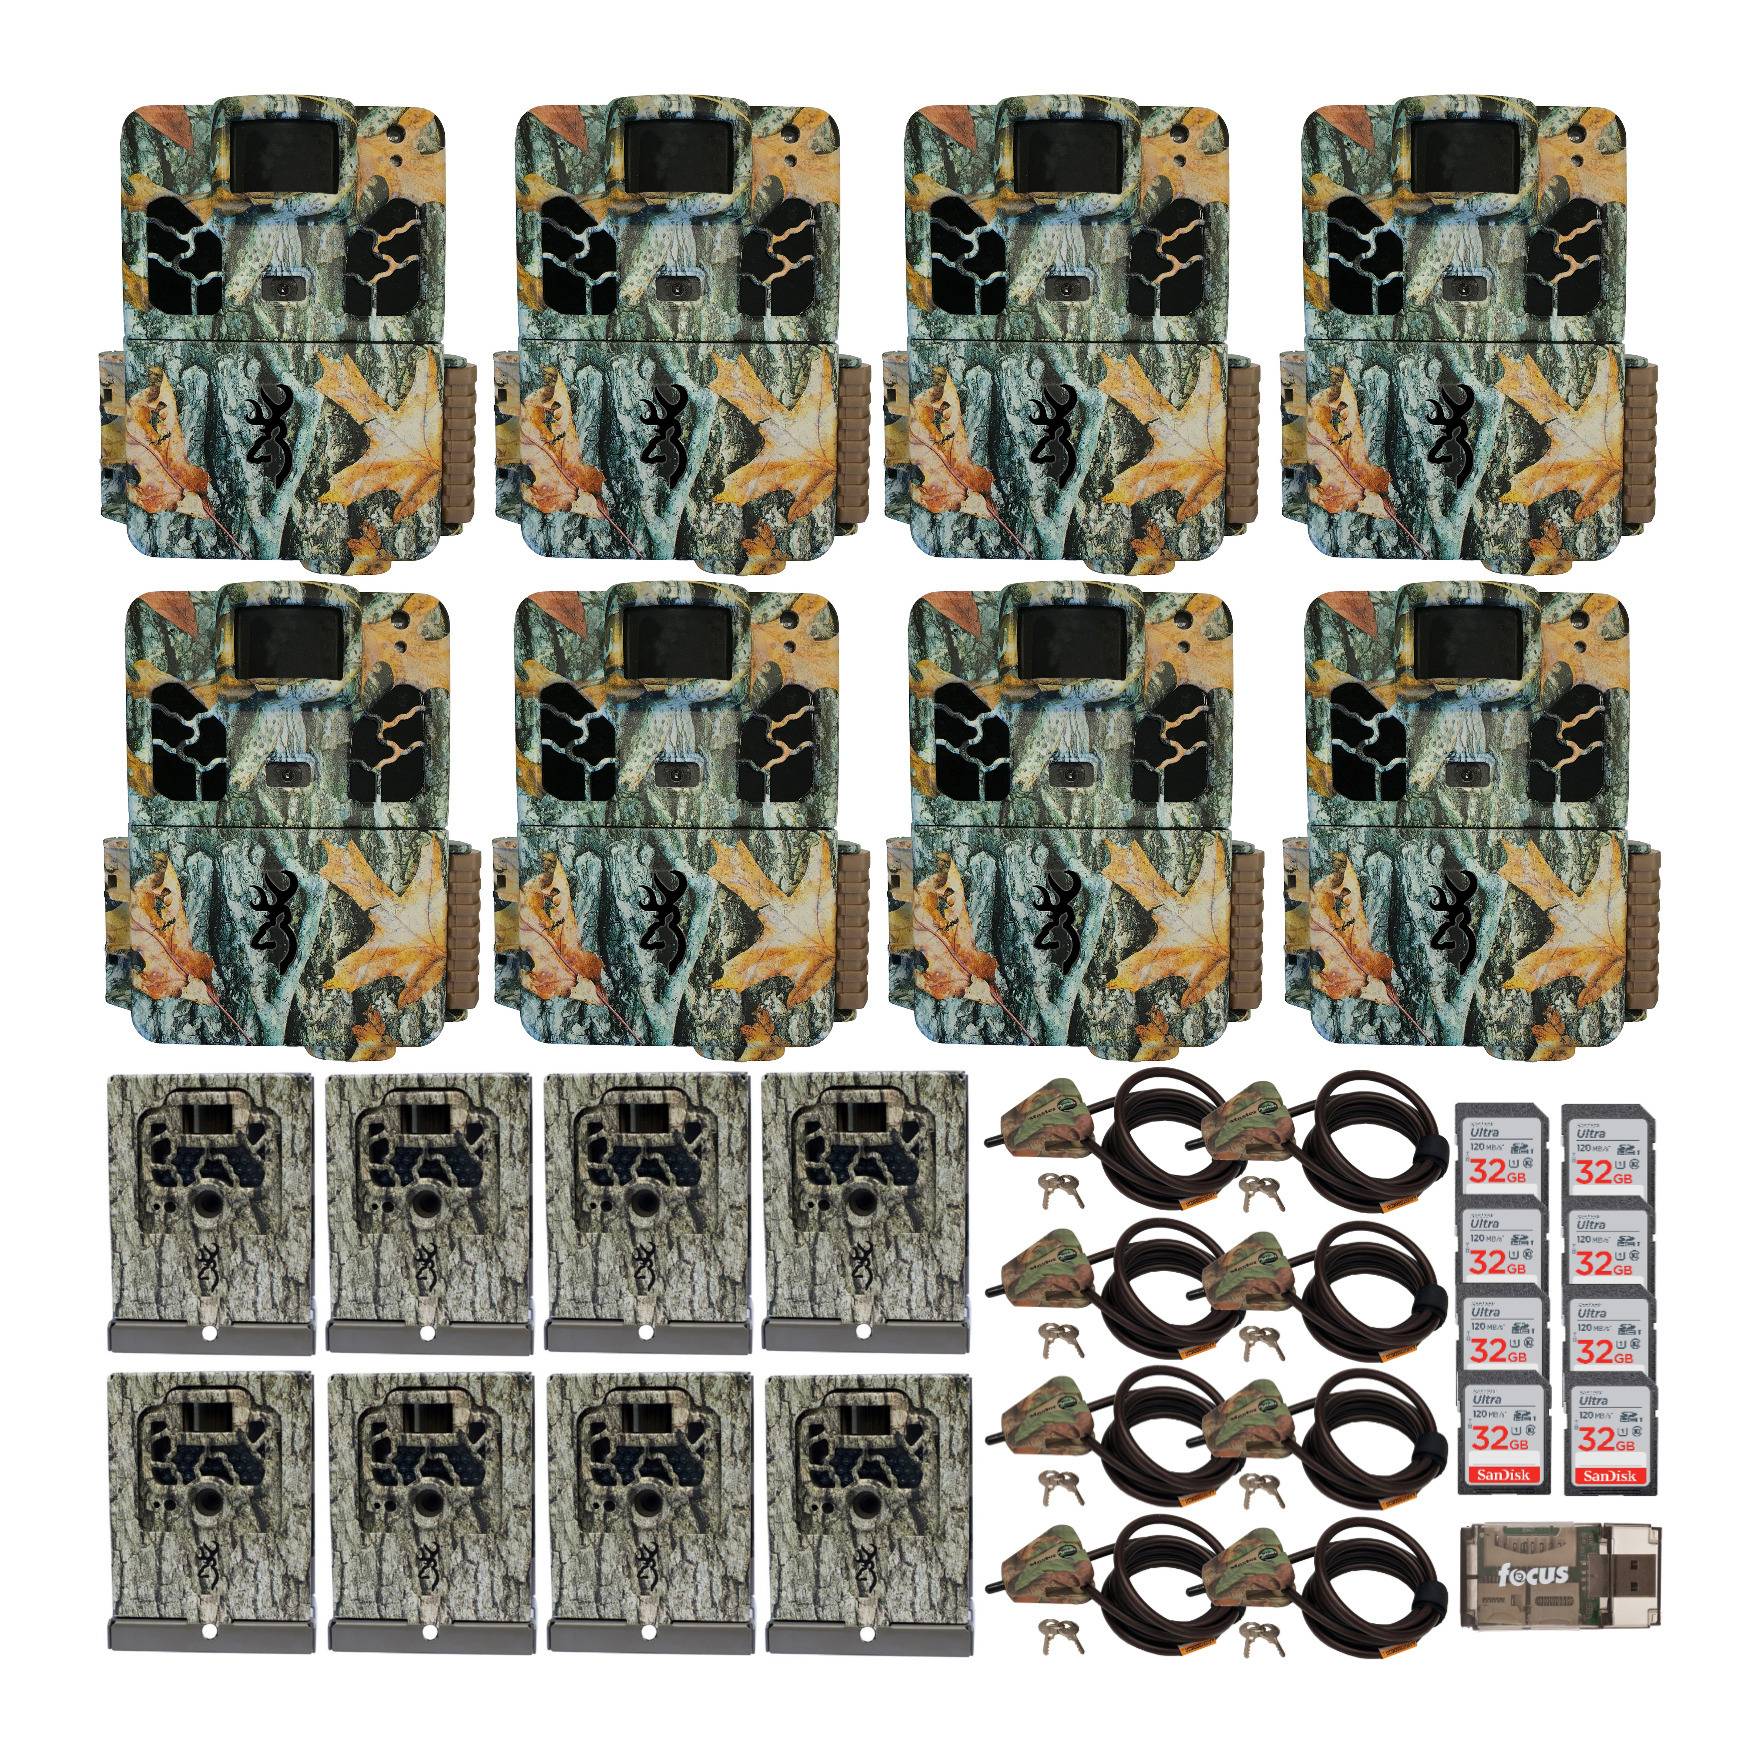 Browning Trail Cameras Dark Ops HD Pro X 20MP Trail Camera Security Bundle (8-Pack)